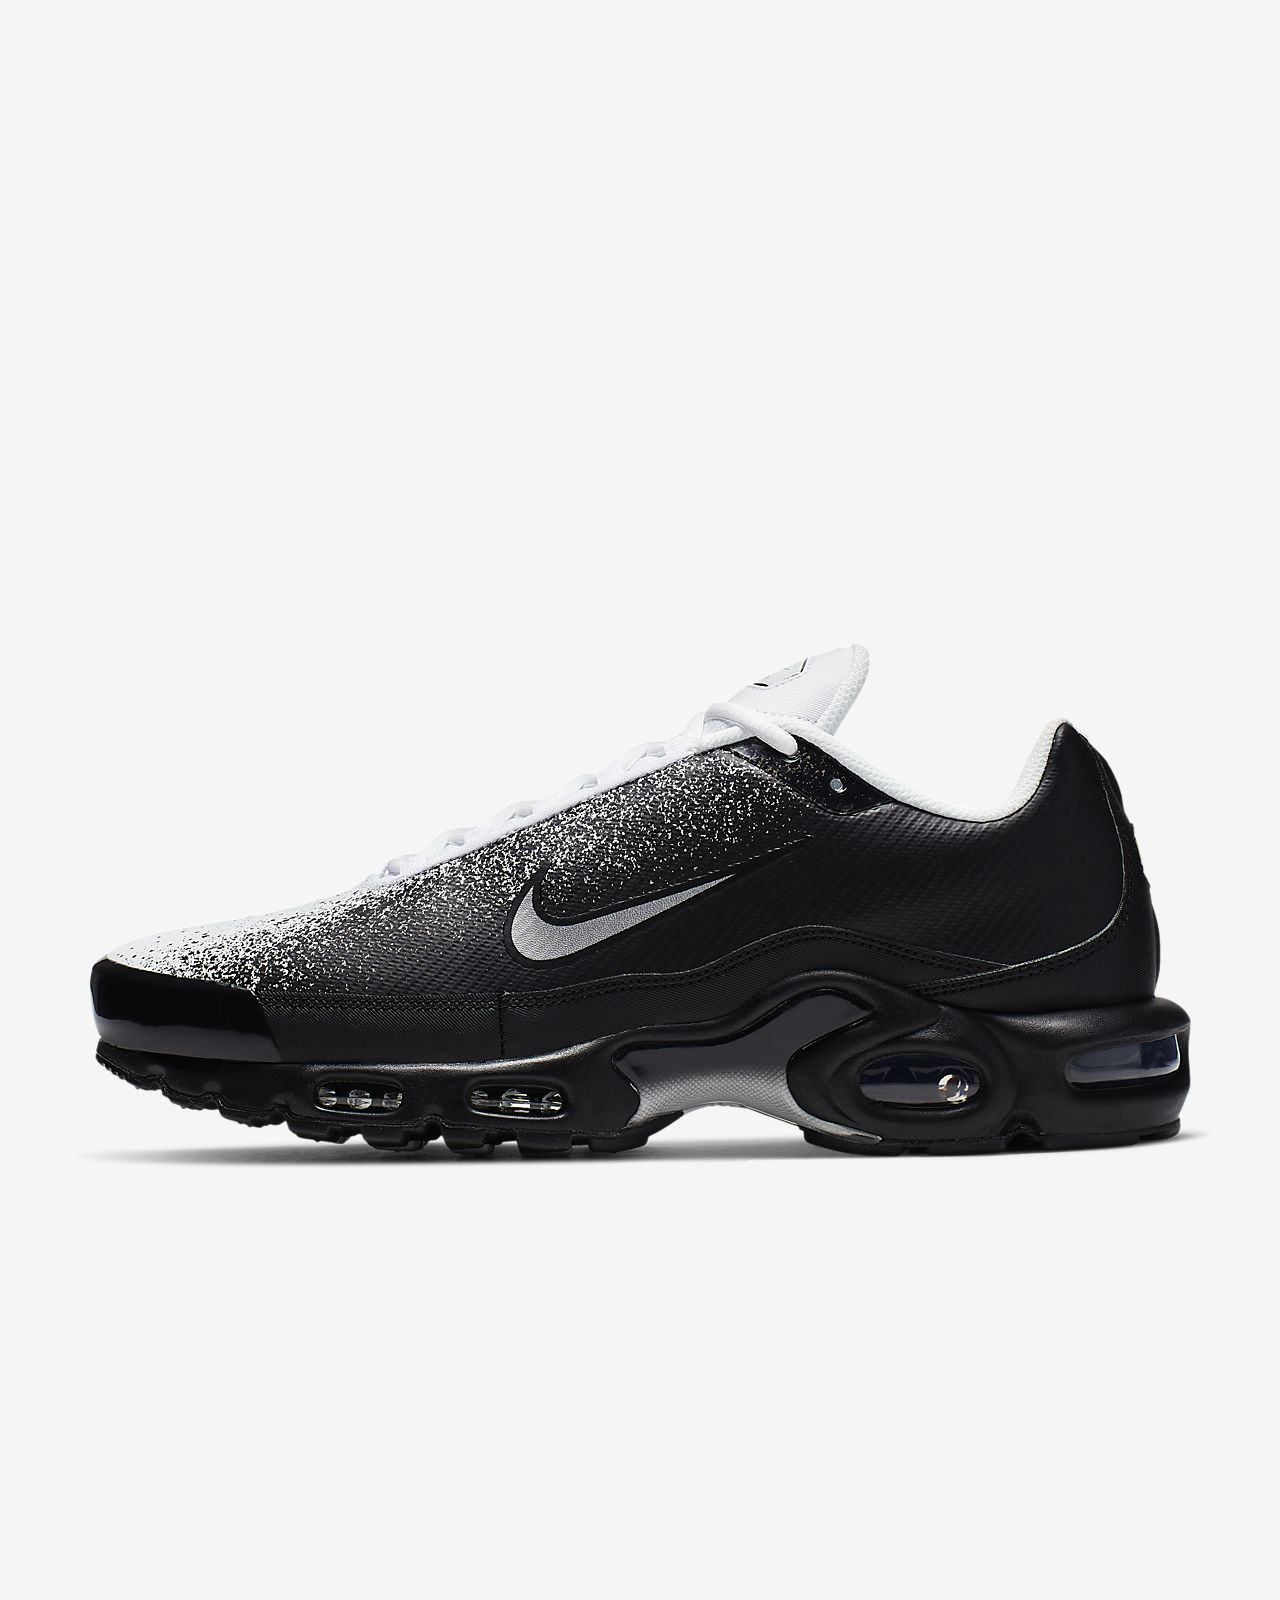 Nike Tn Air Max Plus Se Top Sellers, UP TO 51% OFF